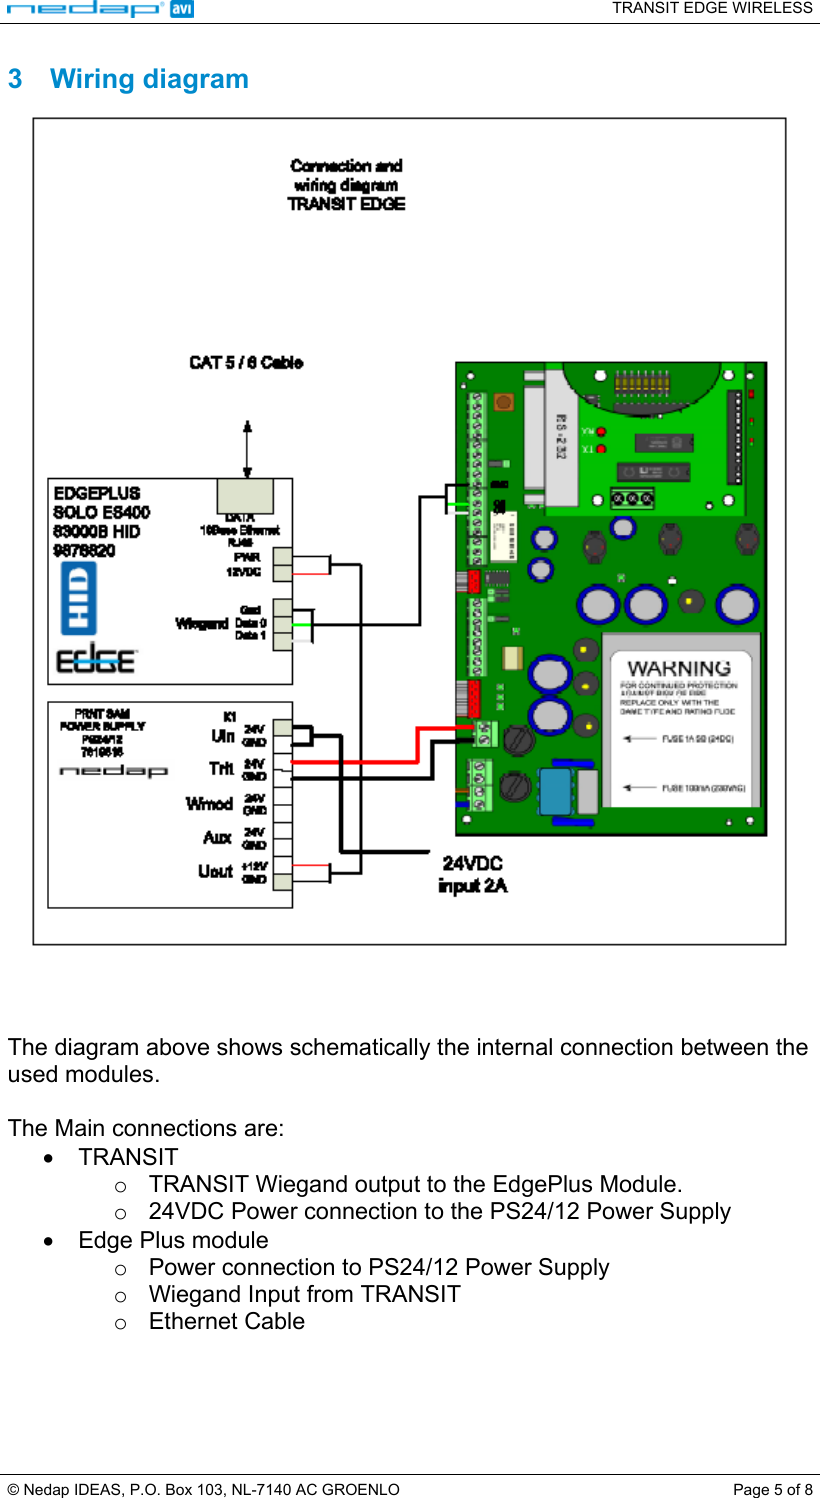   TRANSIT EDGE WIRELESS  © Nedap IDEAS, P.O. Box 103, NL-7140 AC GROENLO  Page 5 of 8 3  Wiring diagram      The diagram above shows schematically the internal connection between the used modules.   The Main connections are: •  TRANSIT o  TRANSIT Wiegand output to the EdgePlus Module. o  24VDC Power connection to the PS24/12 Power Supply •  Edge Plus module o  Power connection to PS24/12 Power Supply o  Wiegand Input from TRANSIT o  Ethernet Cable      